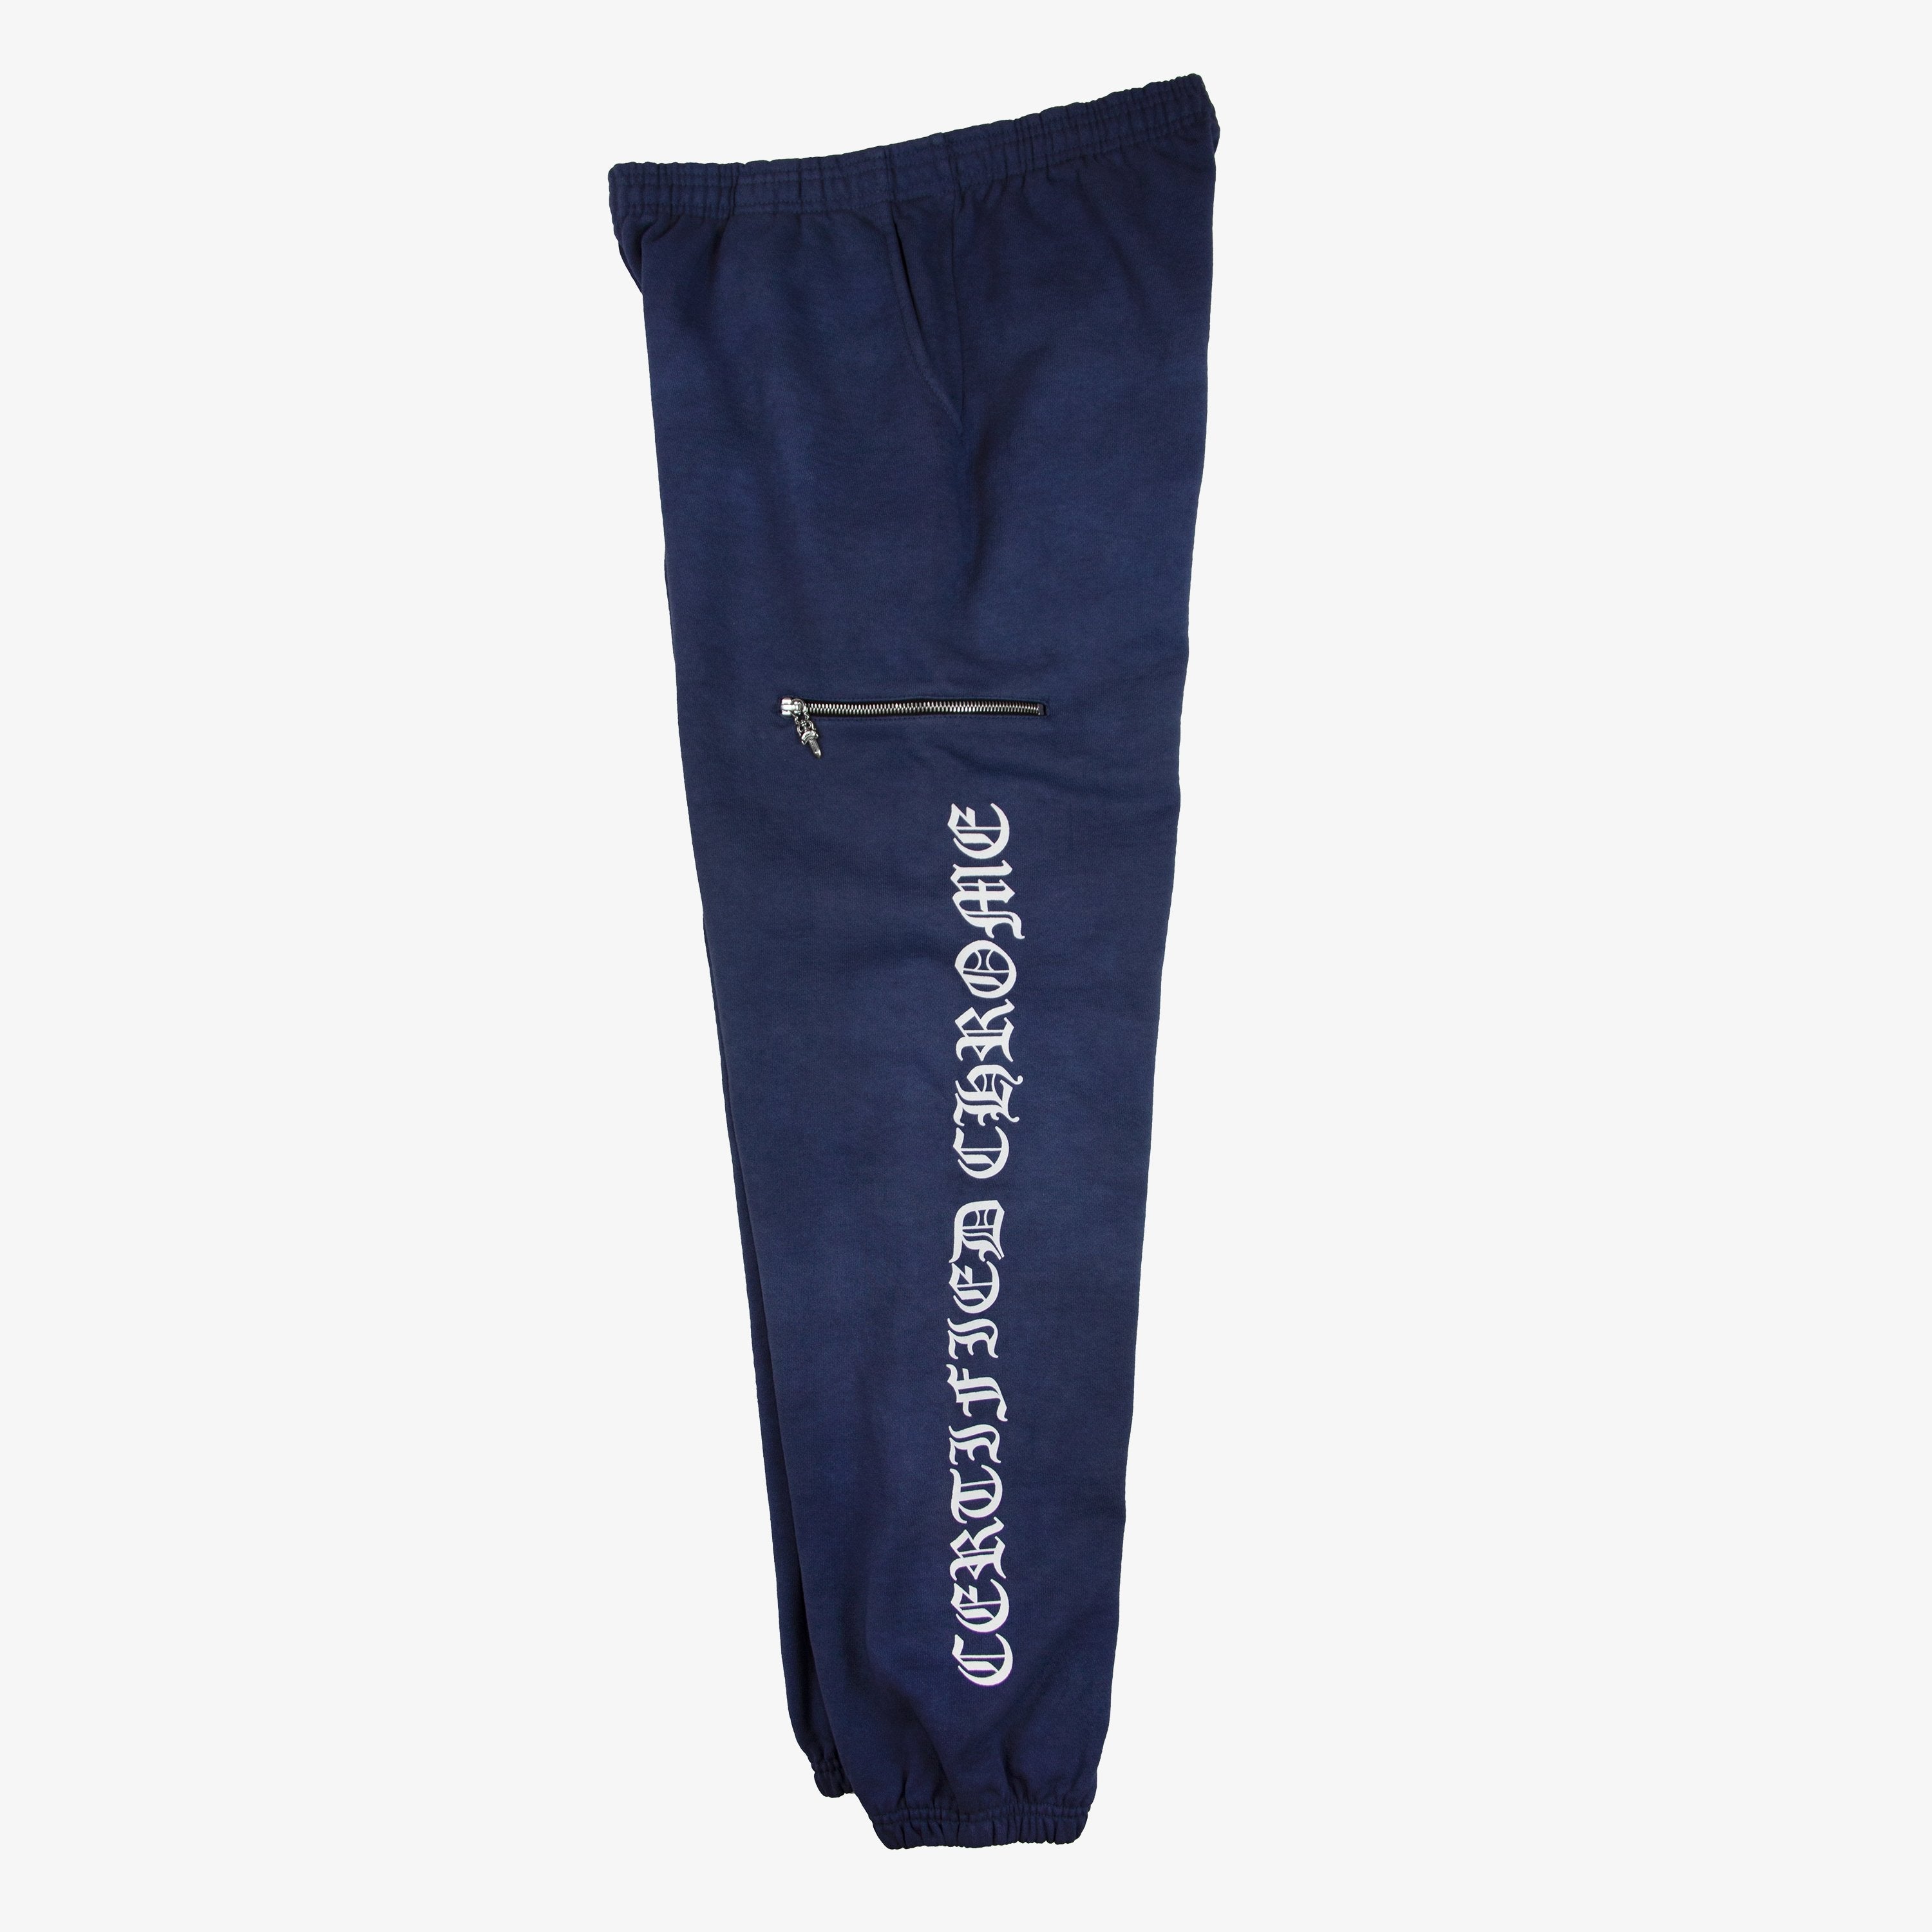 x DRAKE FRIENDS AND FAMILY CROSS PATCH SWEATPANT